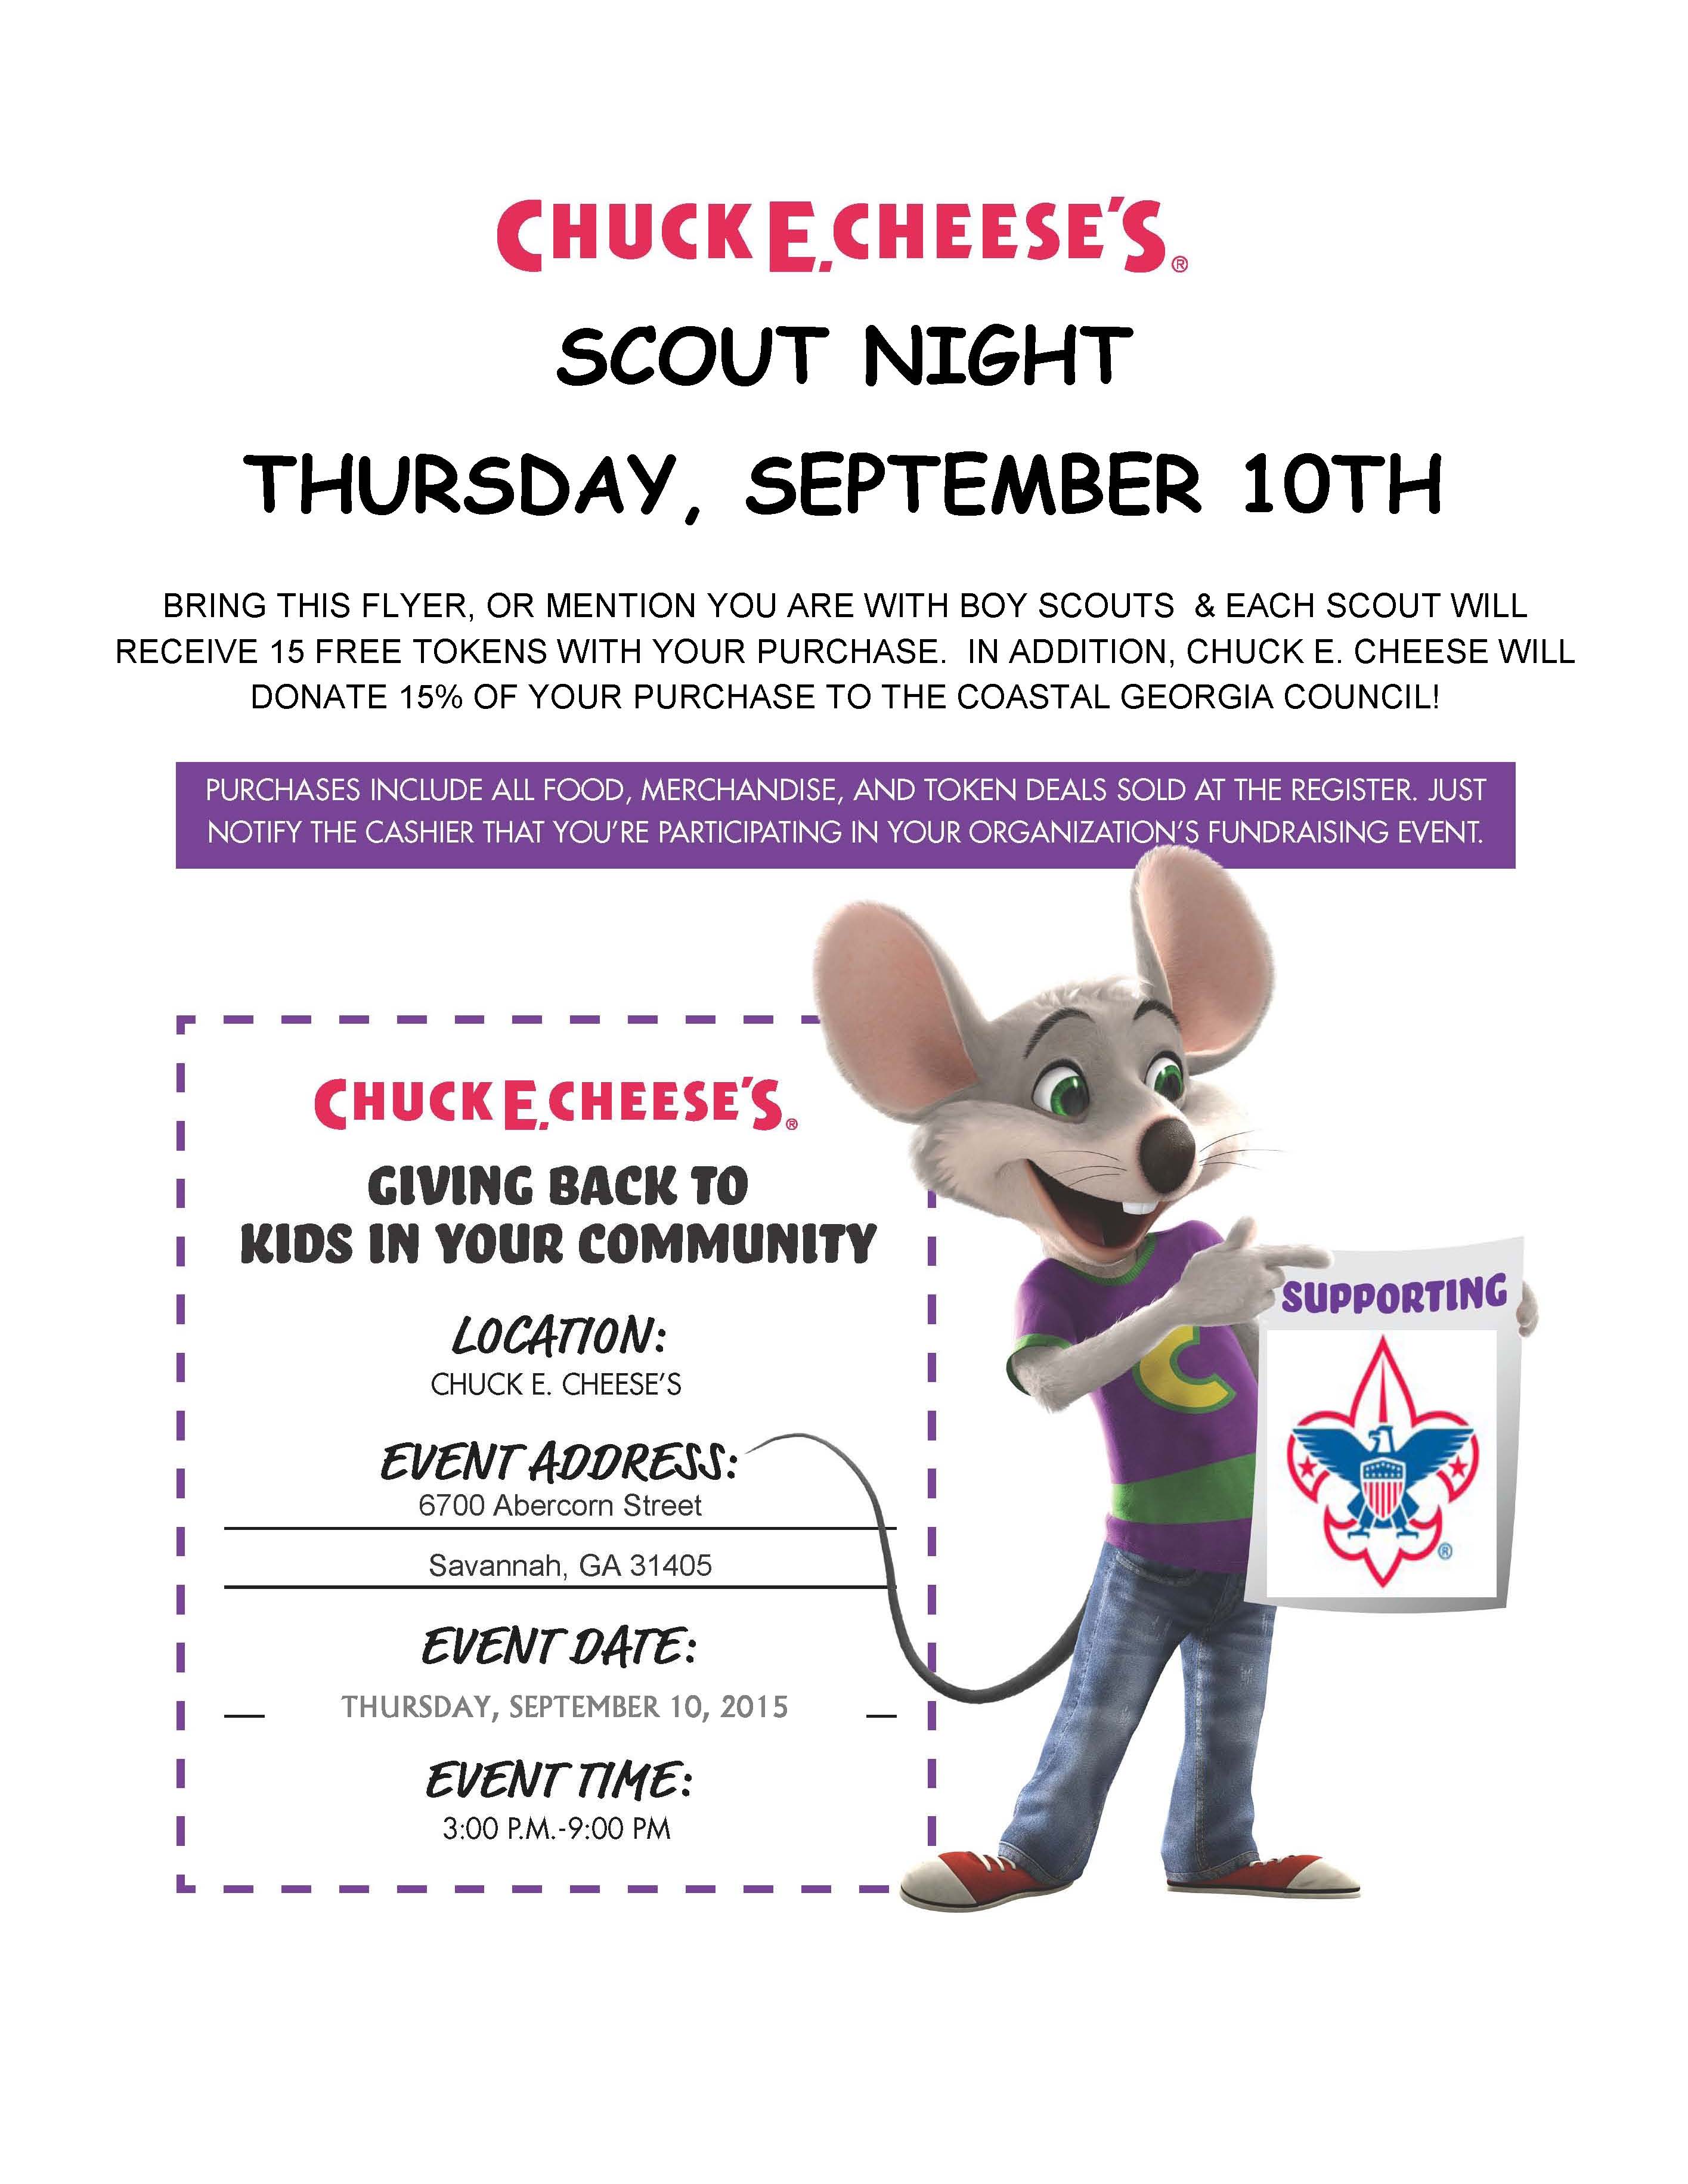 Boy Scout Night At Chuck E Cheese